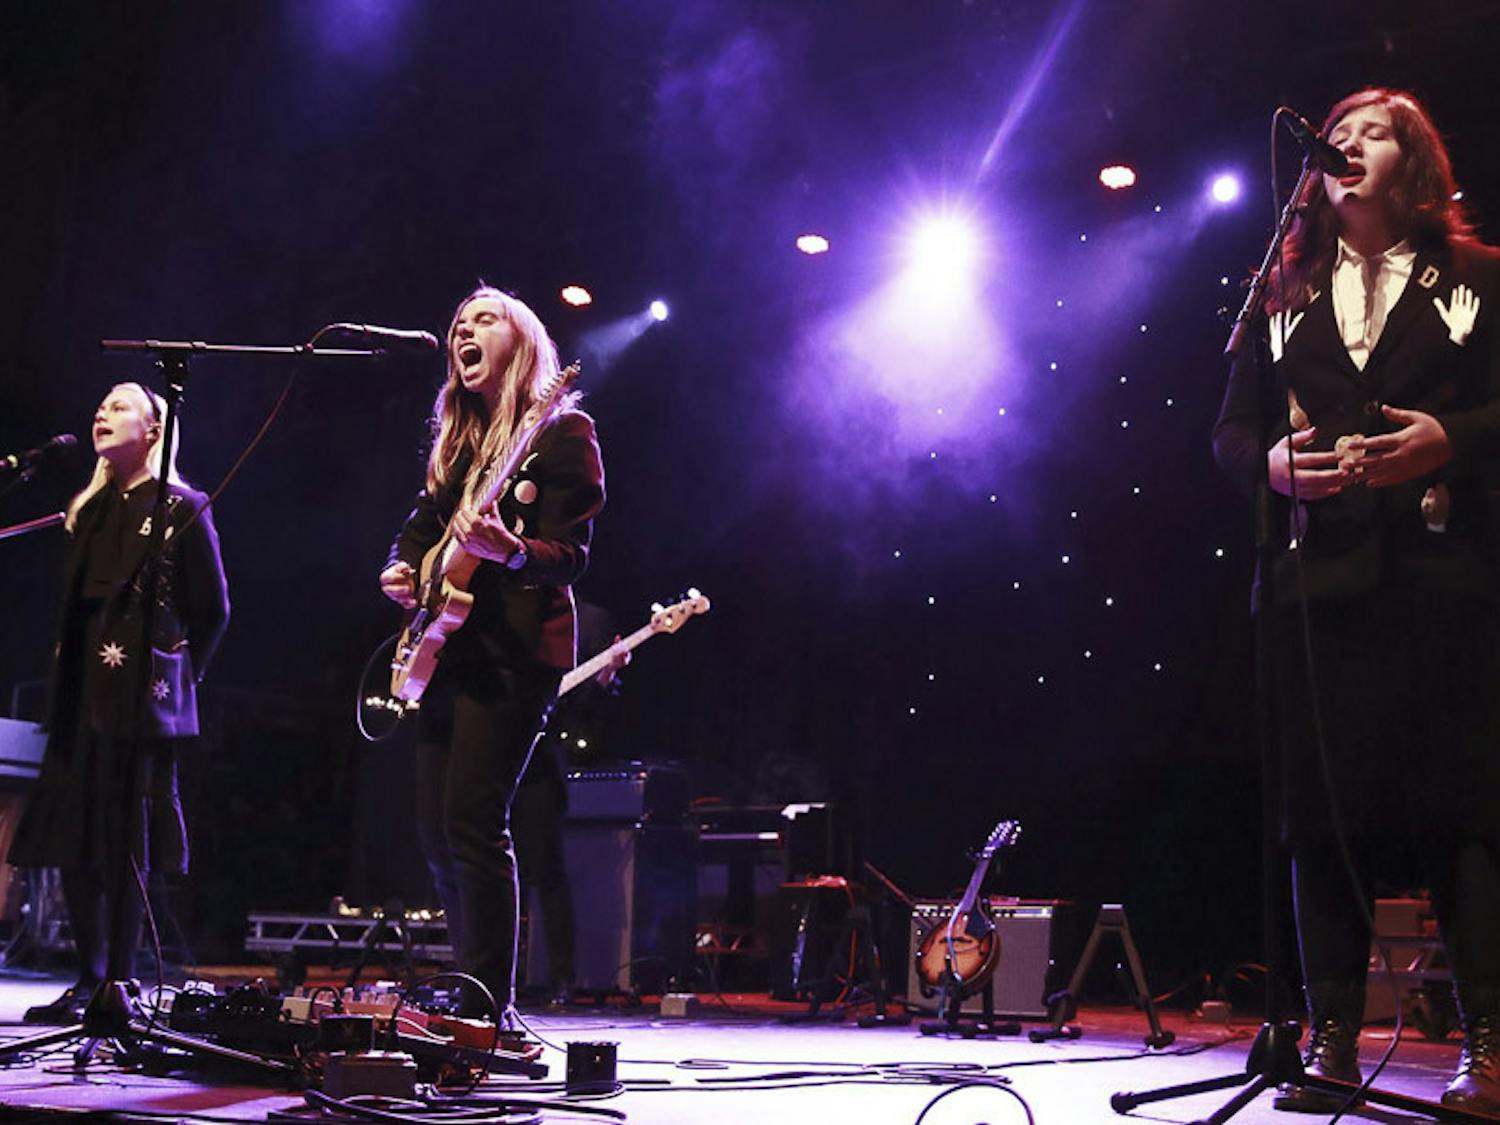 Phoebe Bridgers (left), Julien Baker (center) and Lucy Dacus (right) from boygenius perform at Thalia Hall in Chicago, Ill., on Nov. 12, 2018. The indie/folk rock band's debut album, "The Record," combines deep topics with harmonic gospel and worship tones.